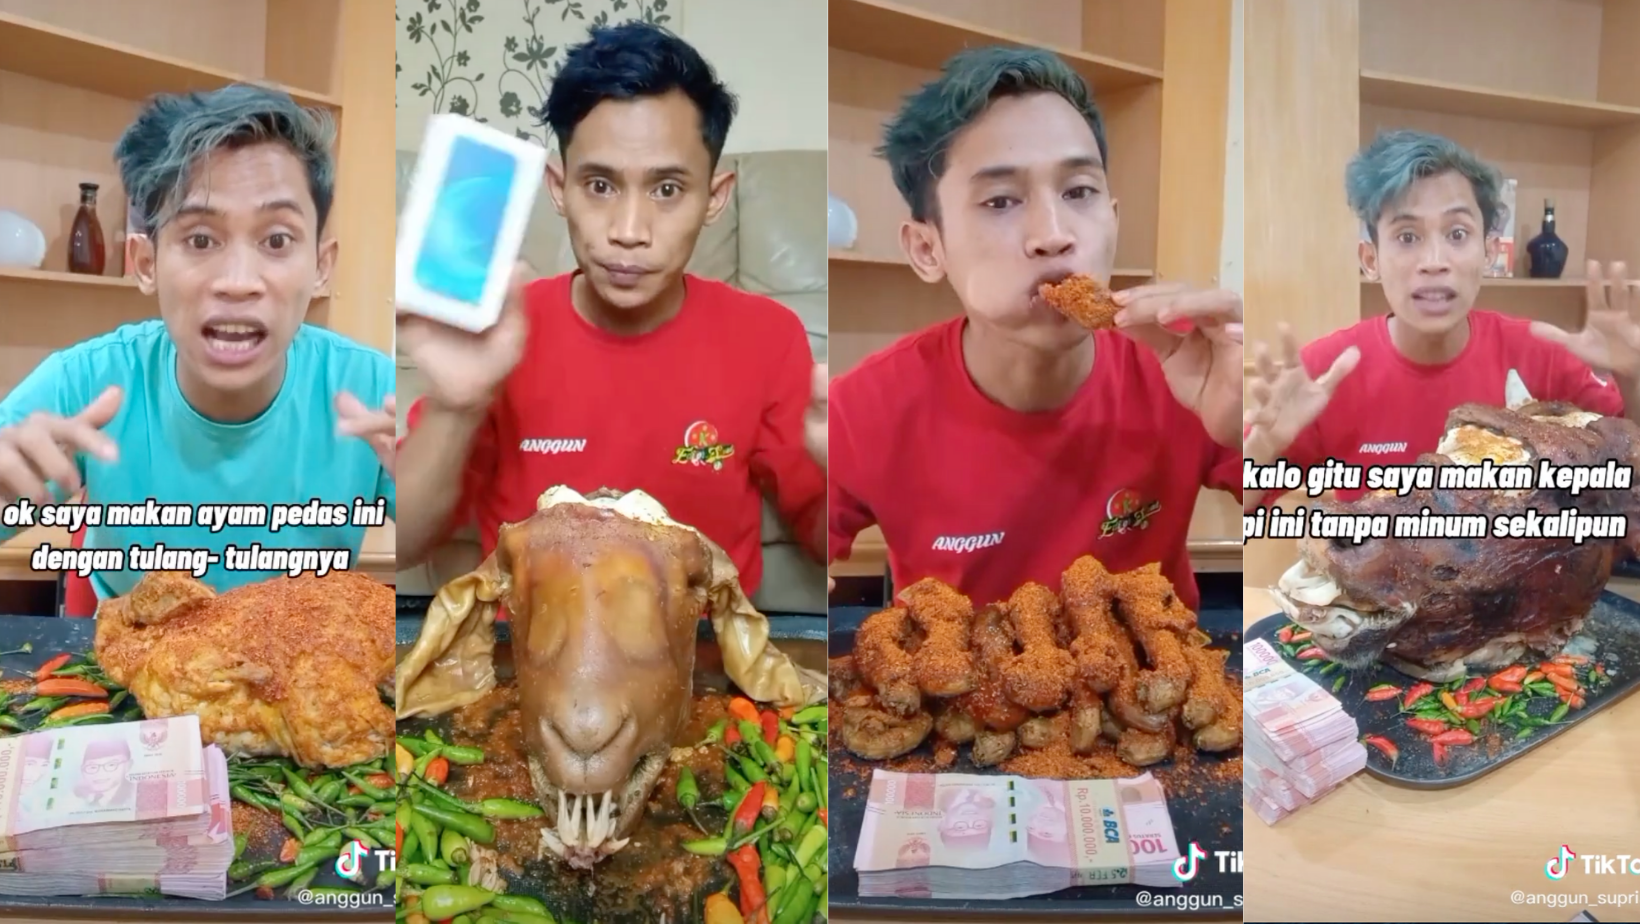 All for the glam: indo influencer goes viral over bizarre eating feats